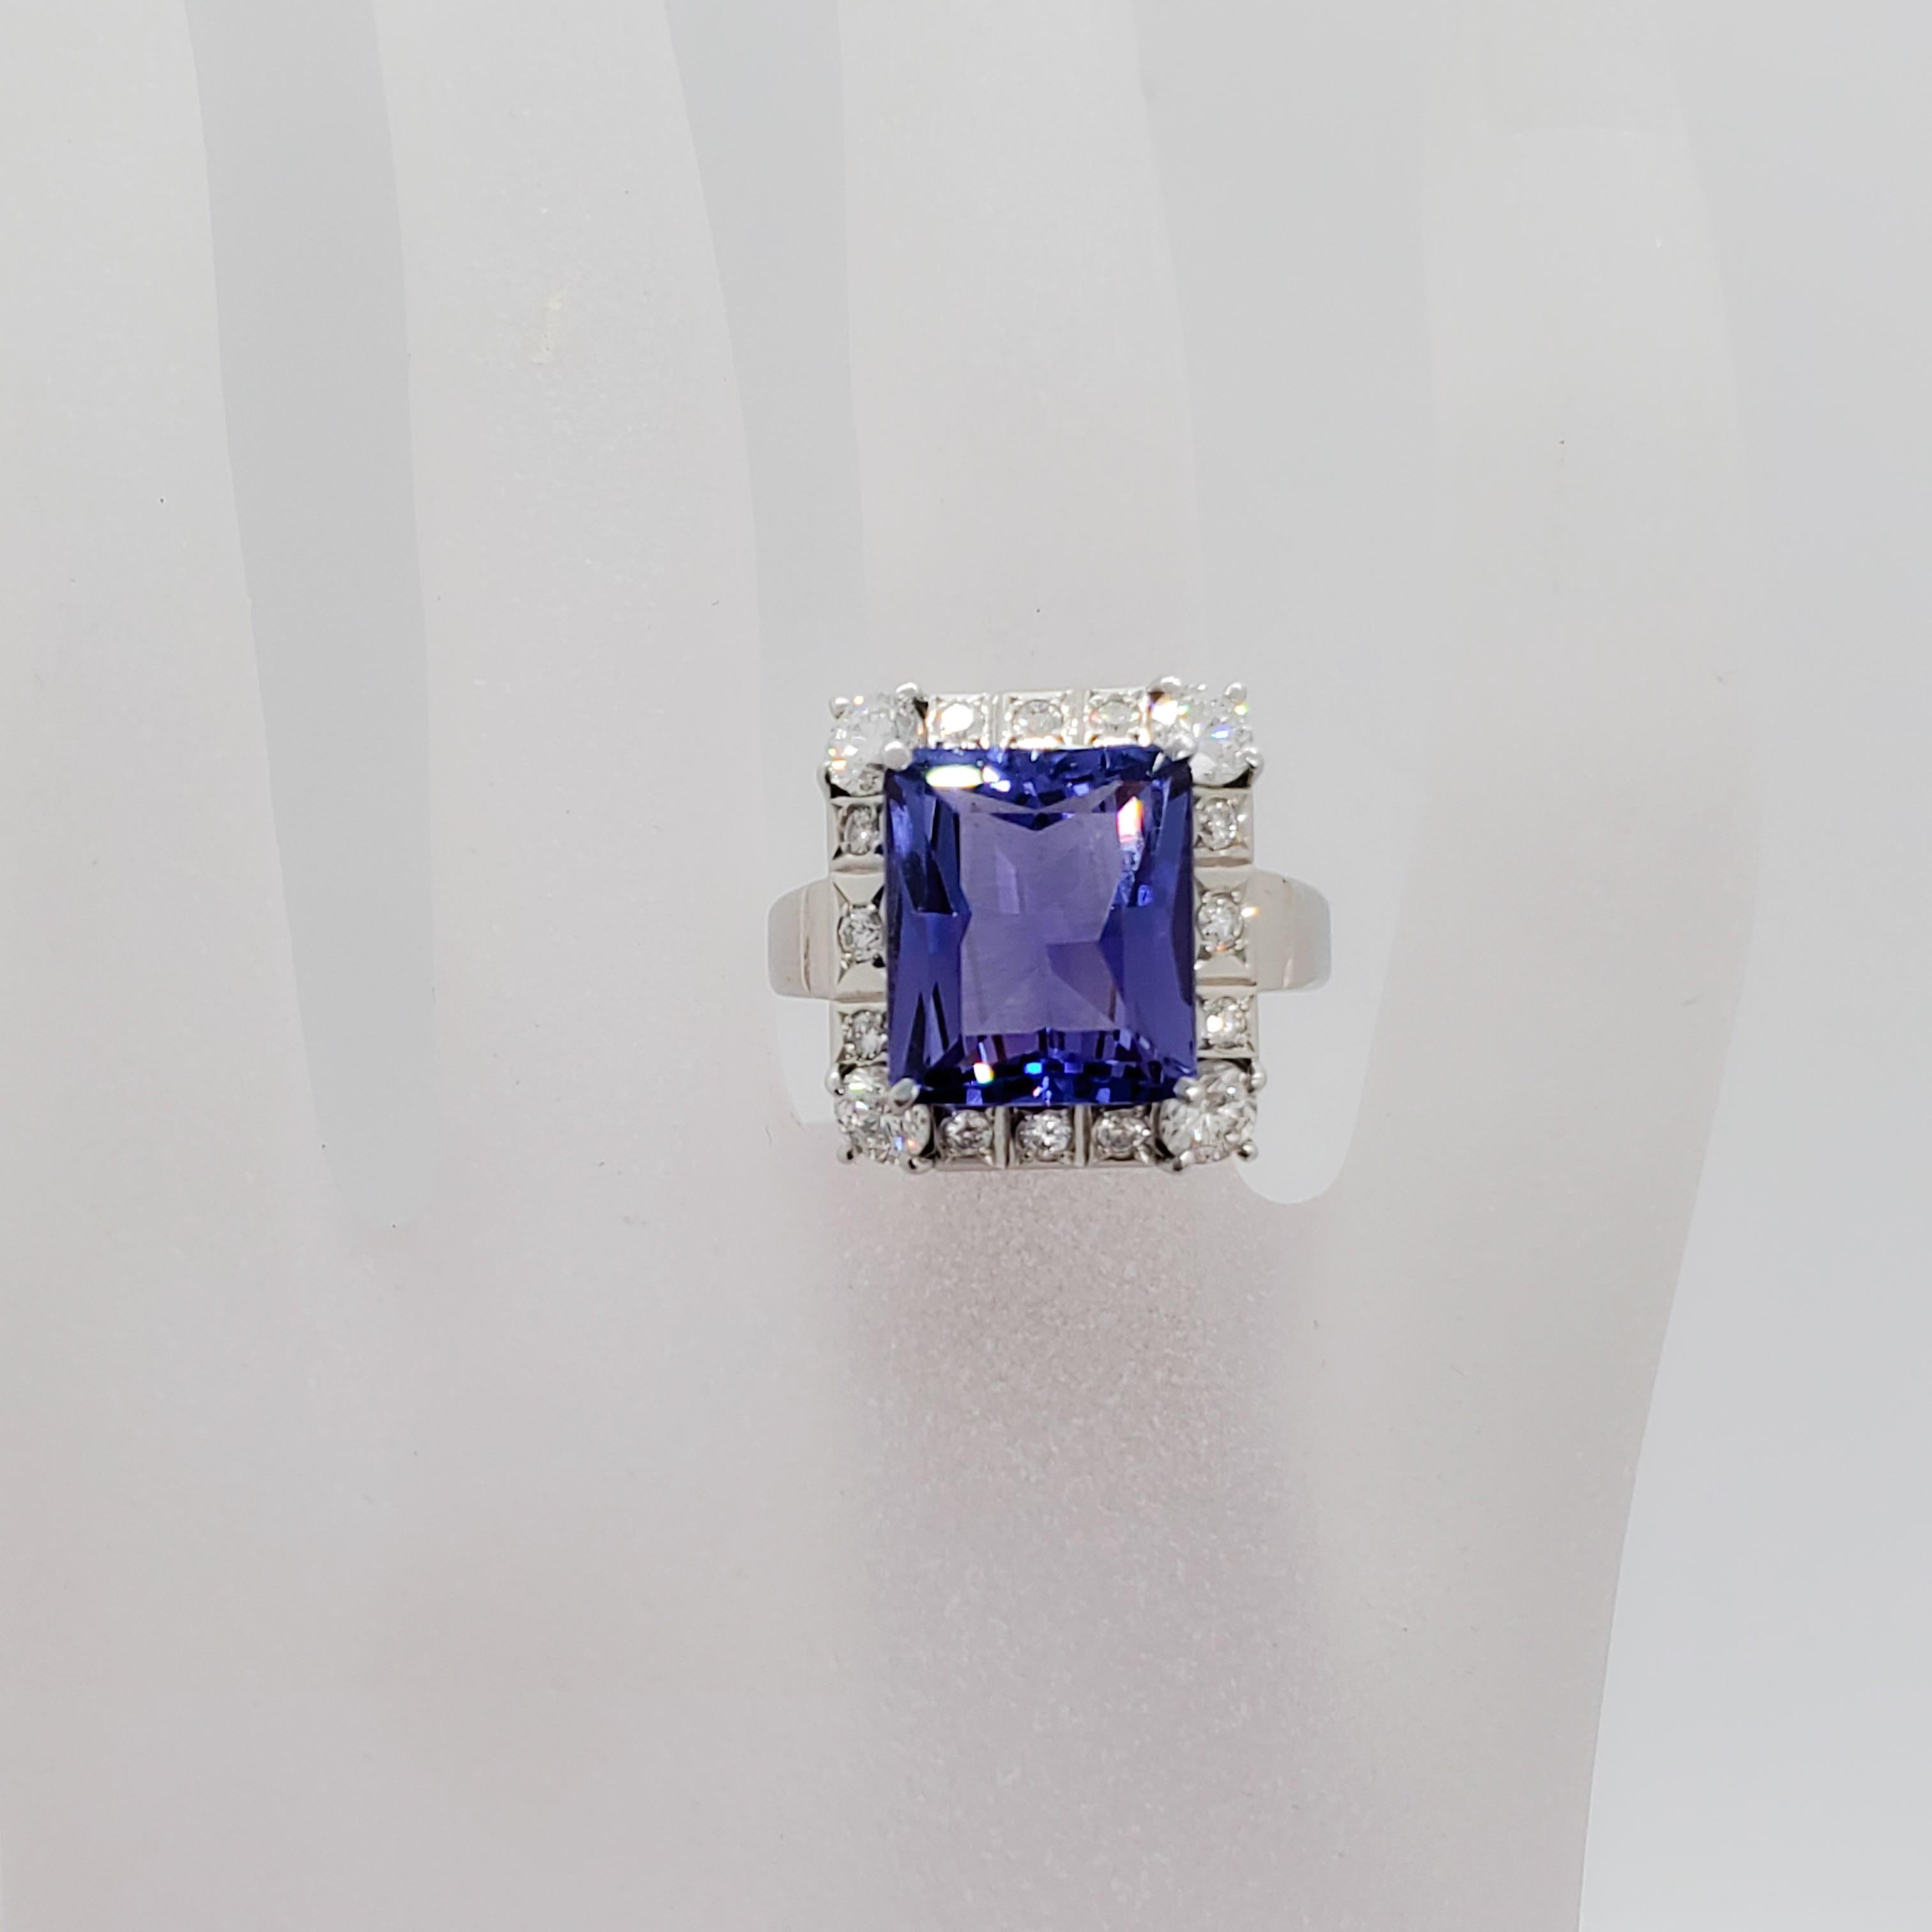 Gorgeous estate deep blue purple tanzanite emerald cut weighing 8.60 ct. with 1.31 ct. of good quality white diamond rounds in a handmade platinum mounting. Ring size 7. Excellent condition.